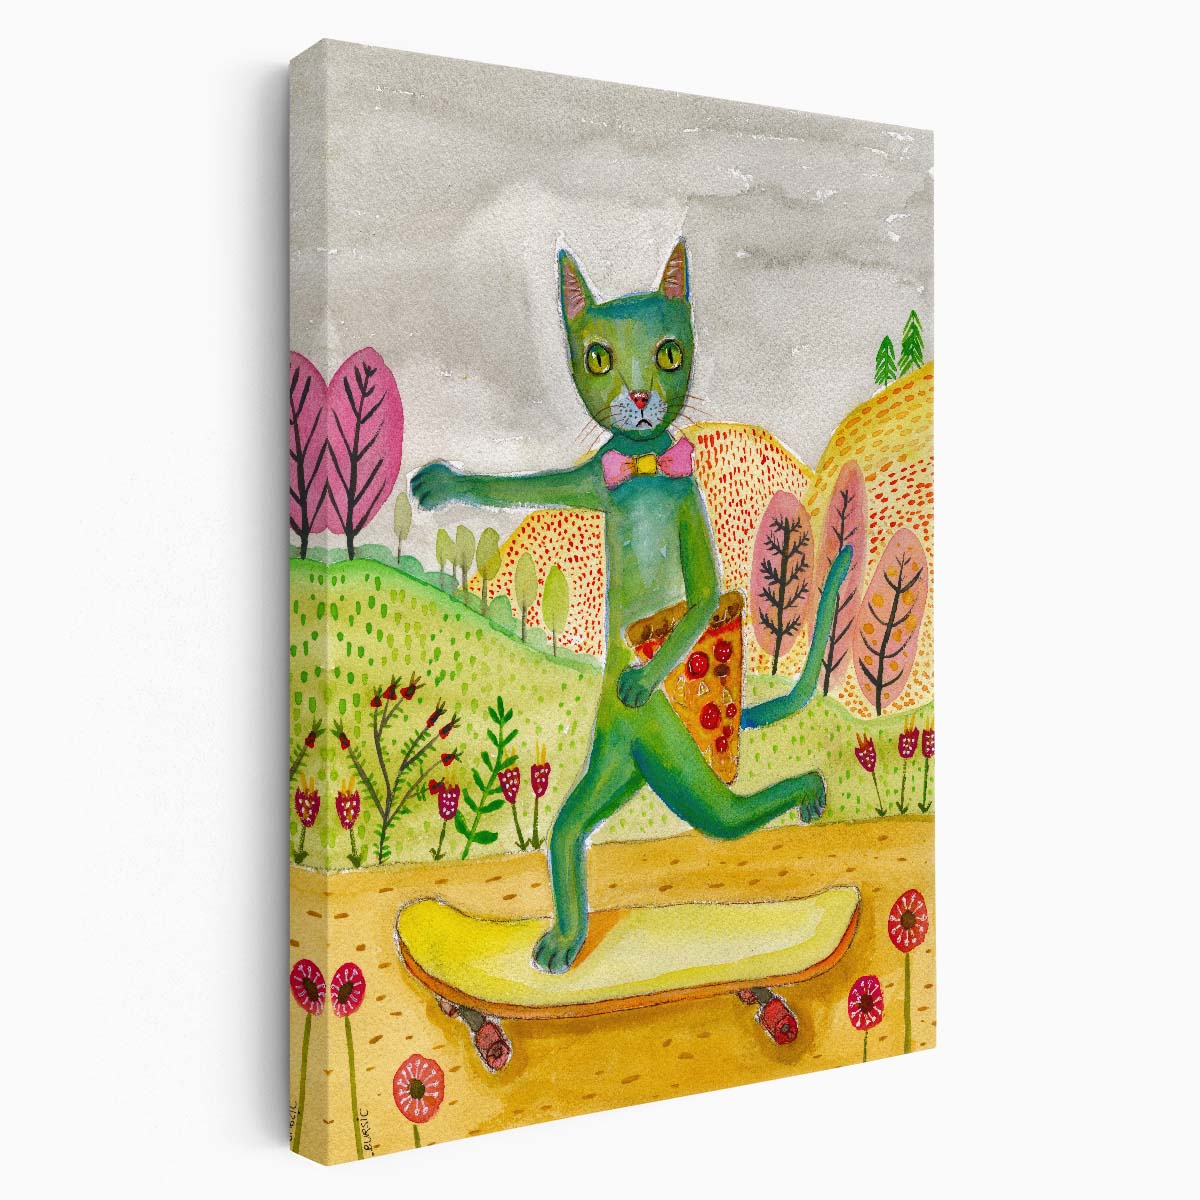 Colorful Pizza Cat Skateboarding Illustration with Floral Botanical Design by Luxuriance Designs, made in USA